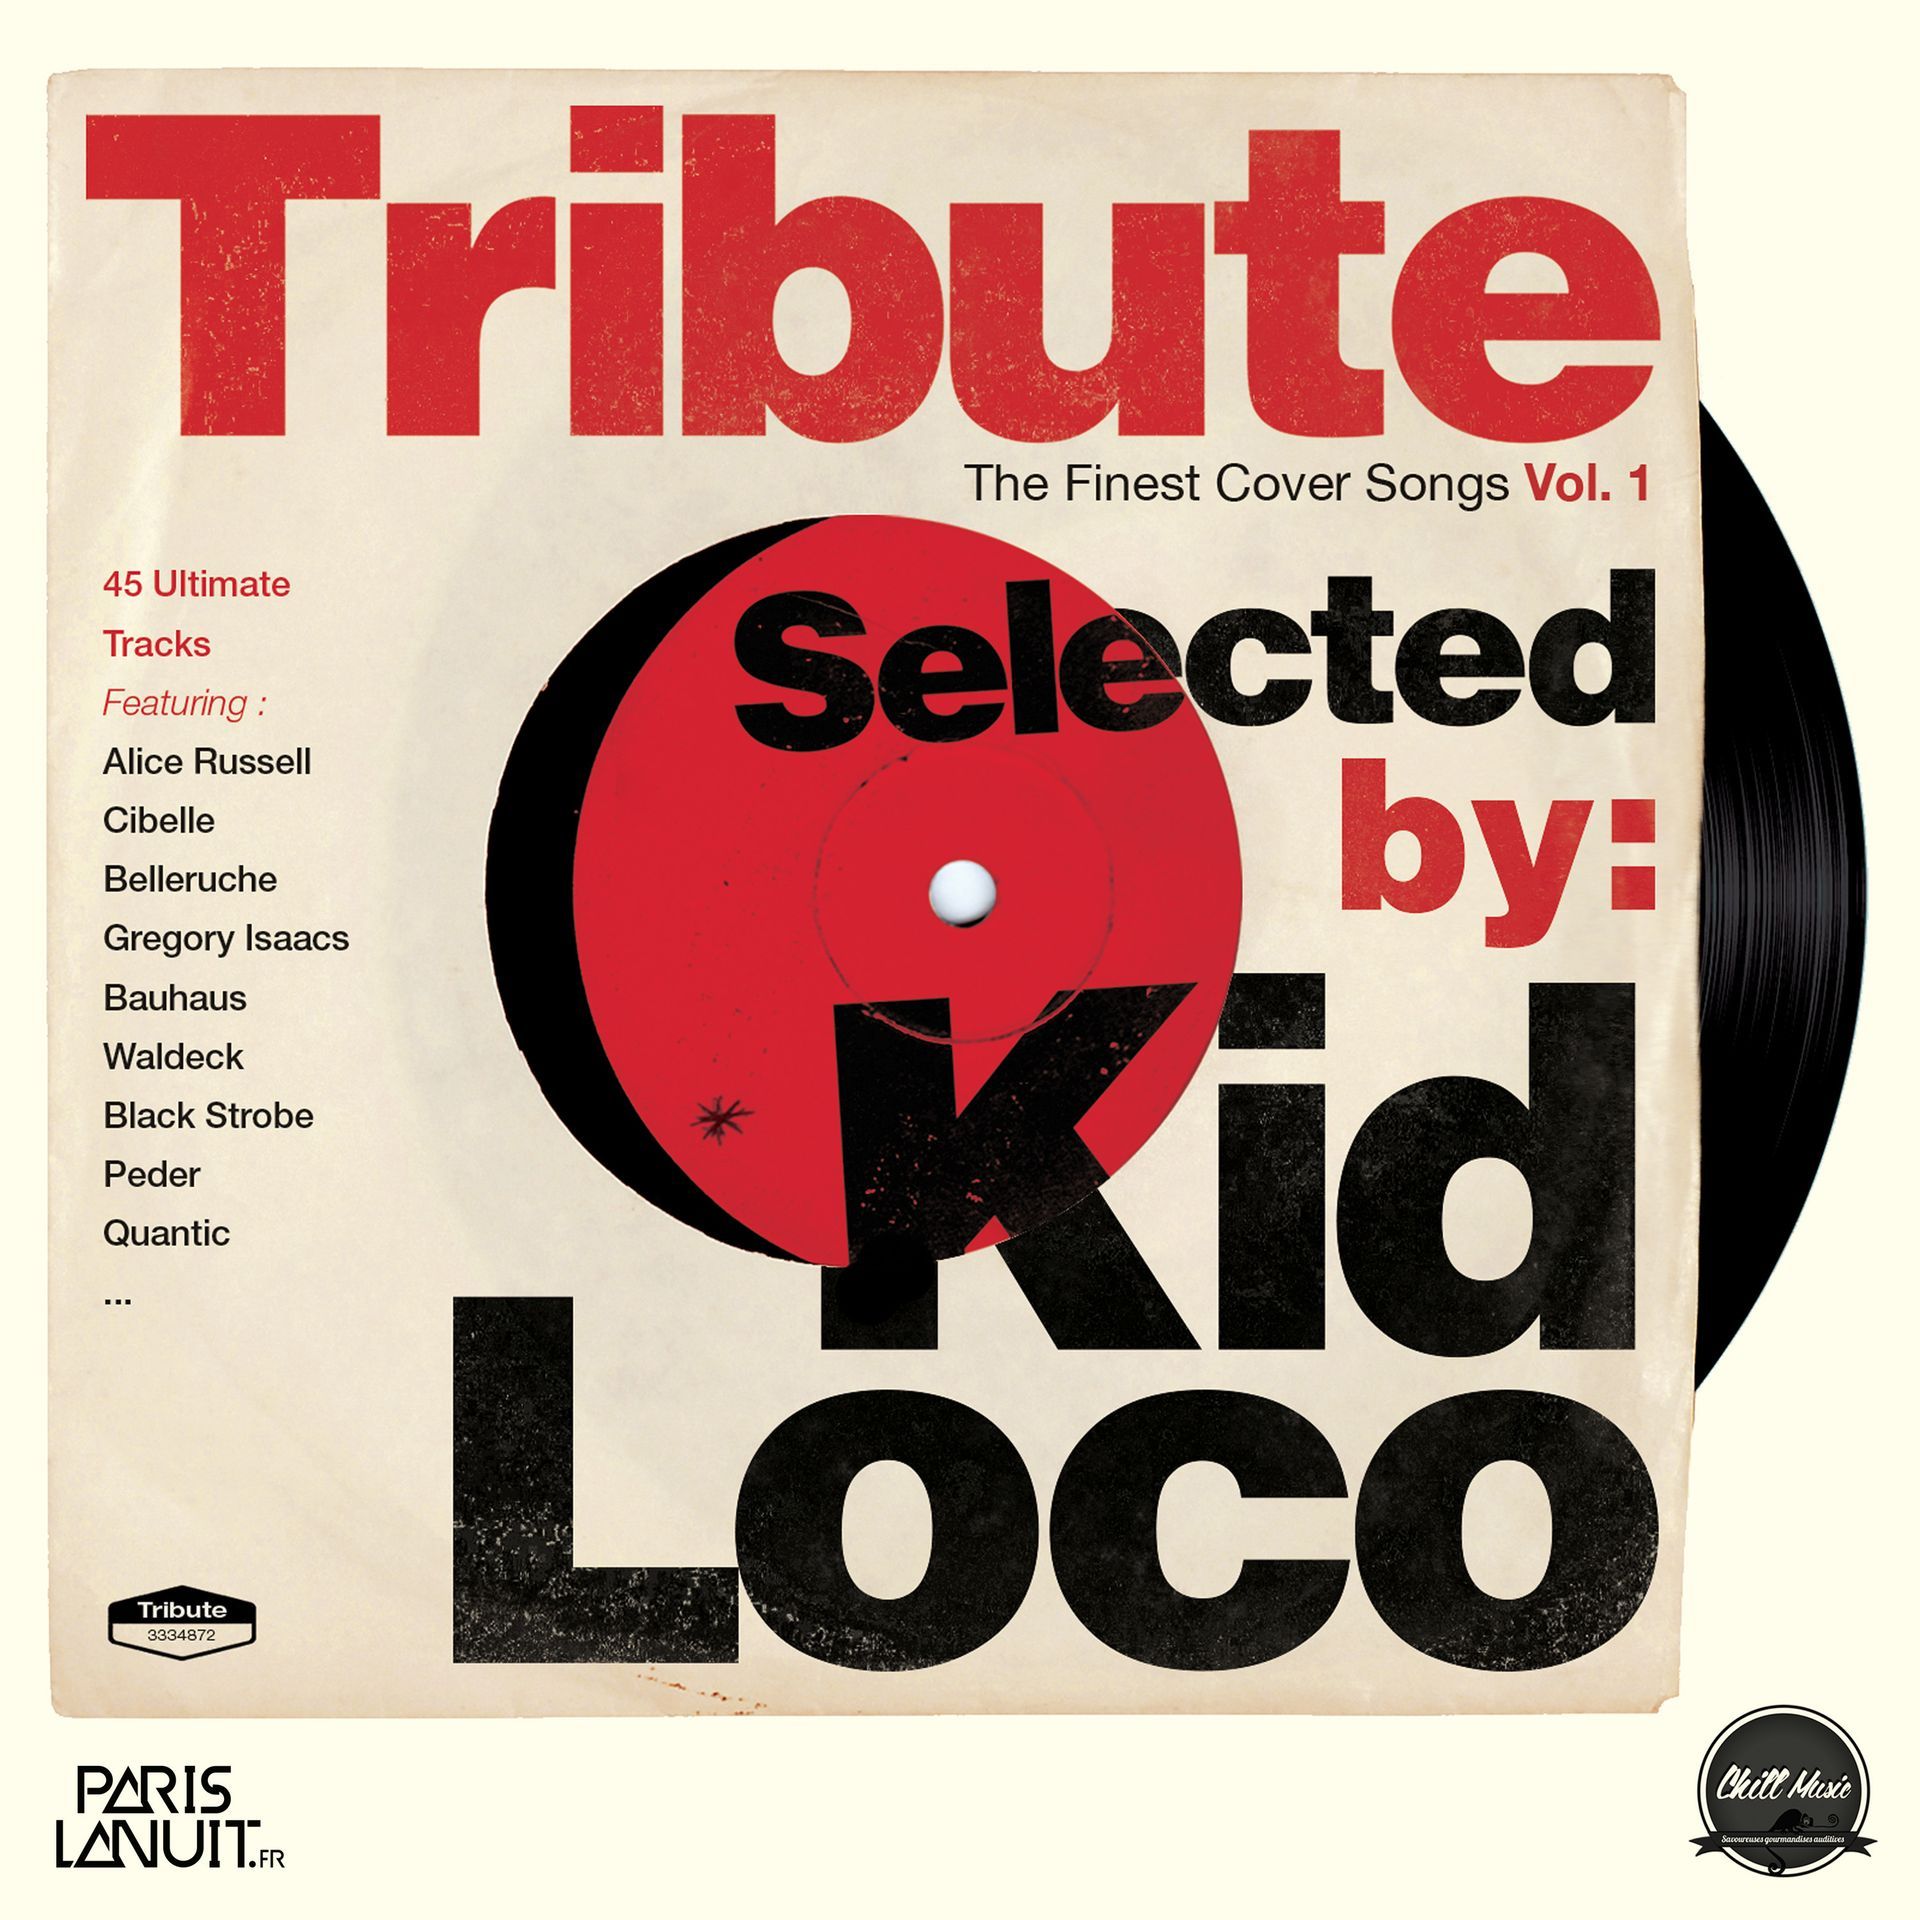 Tribute: The Finest Cover Songs by Kid Loco, Vol. 1 album art